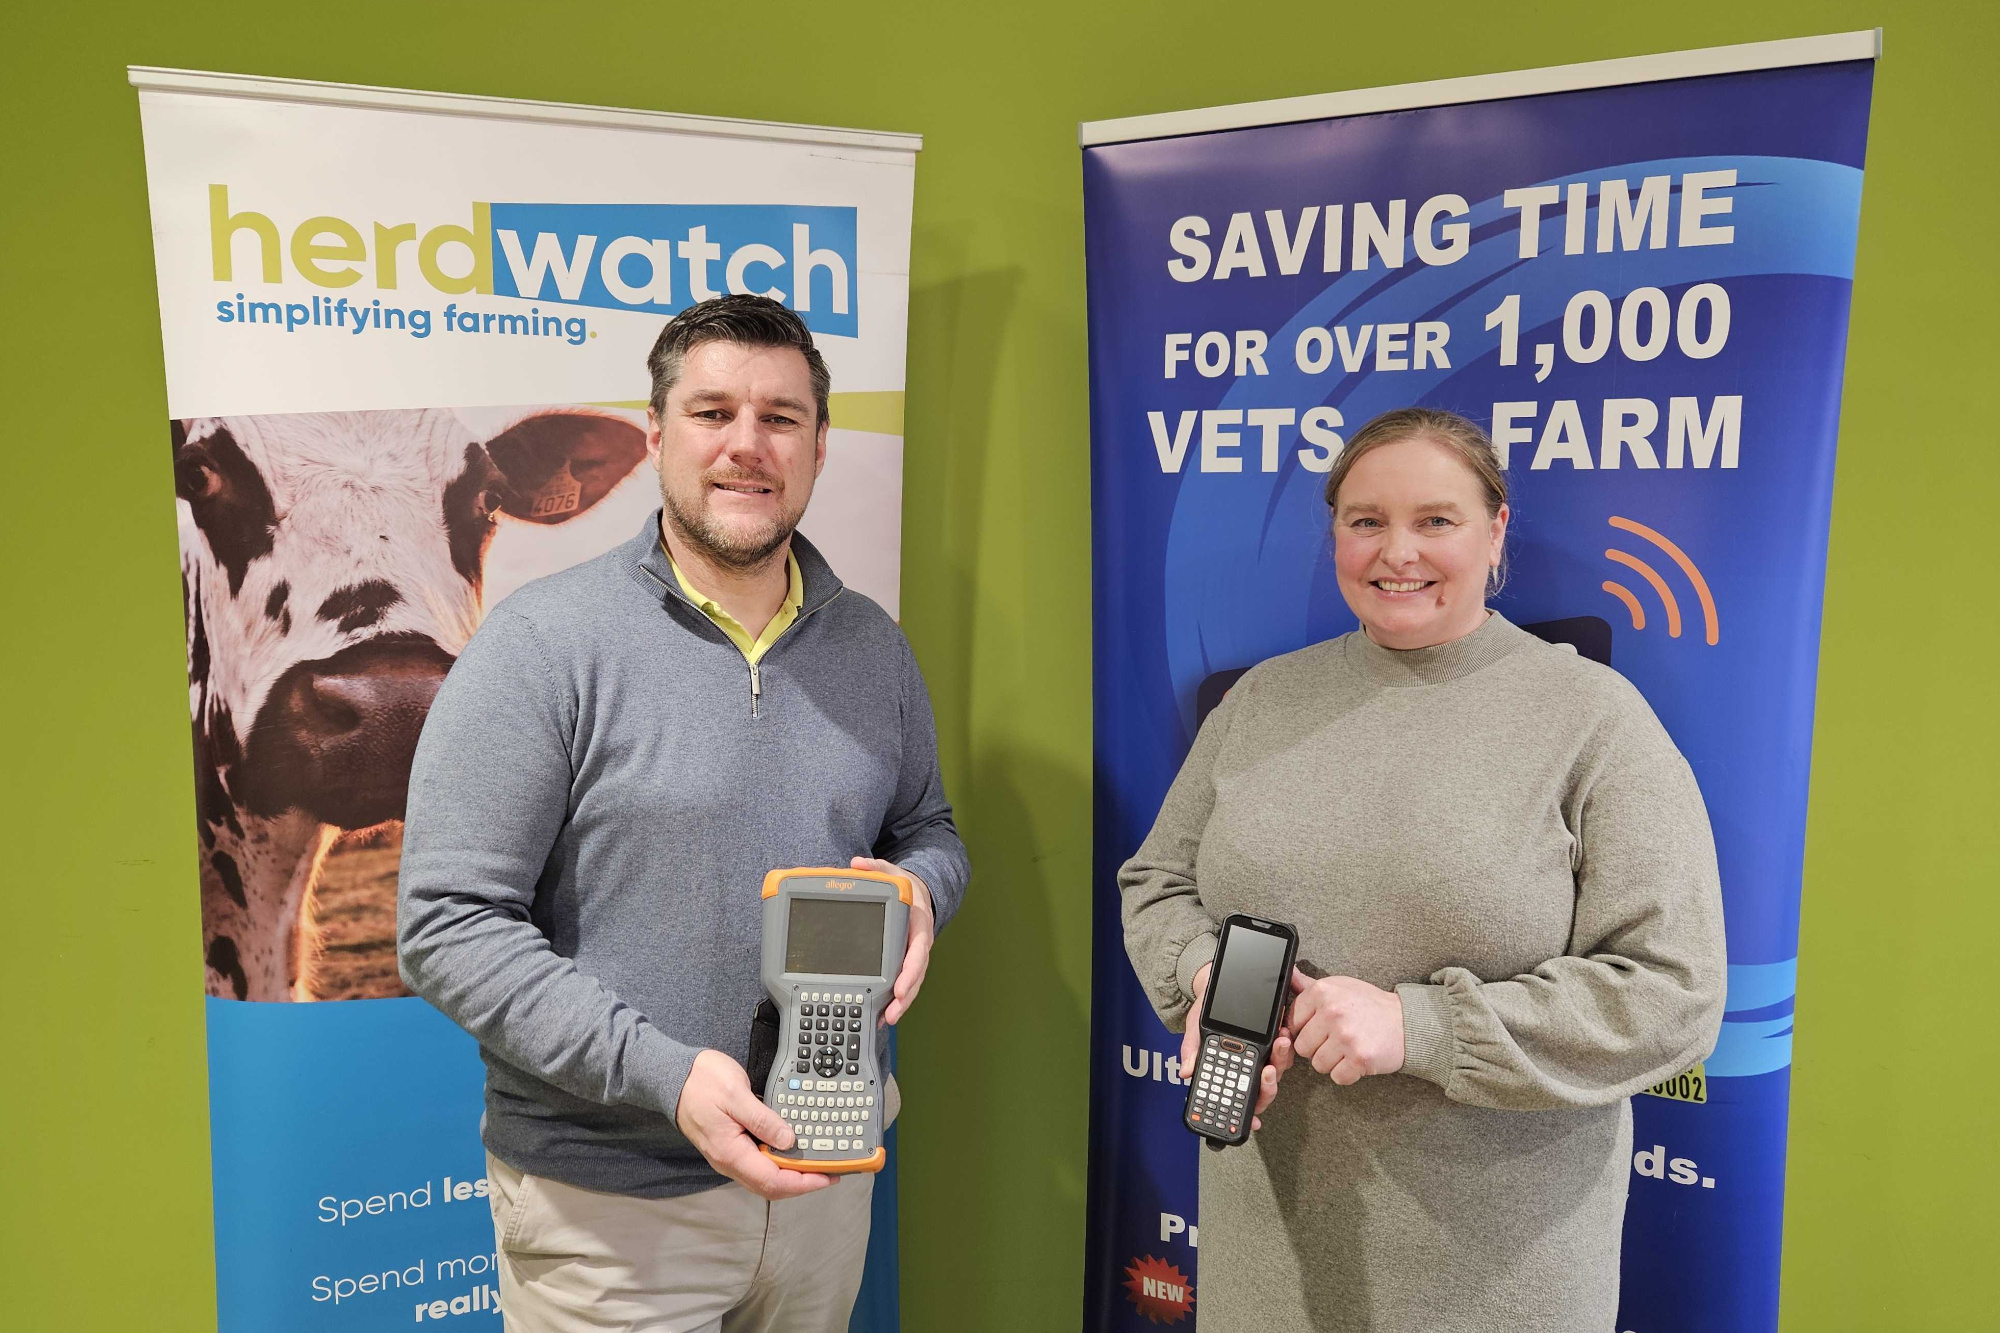 Agtech Leader Herdwatch acquires two vet software companies in the UK and Ireland